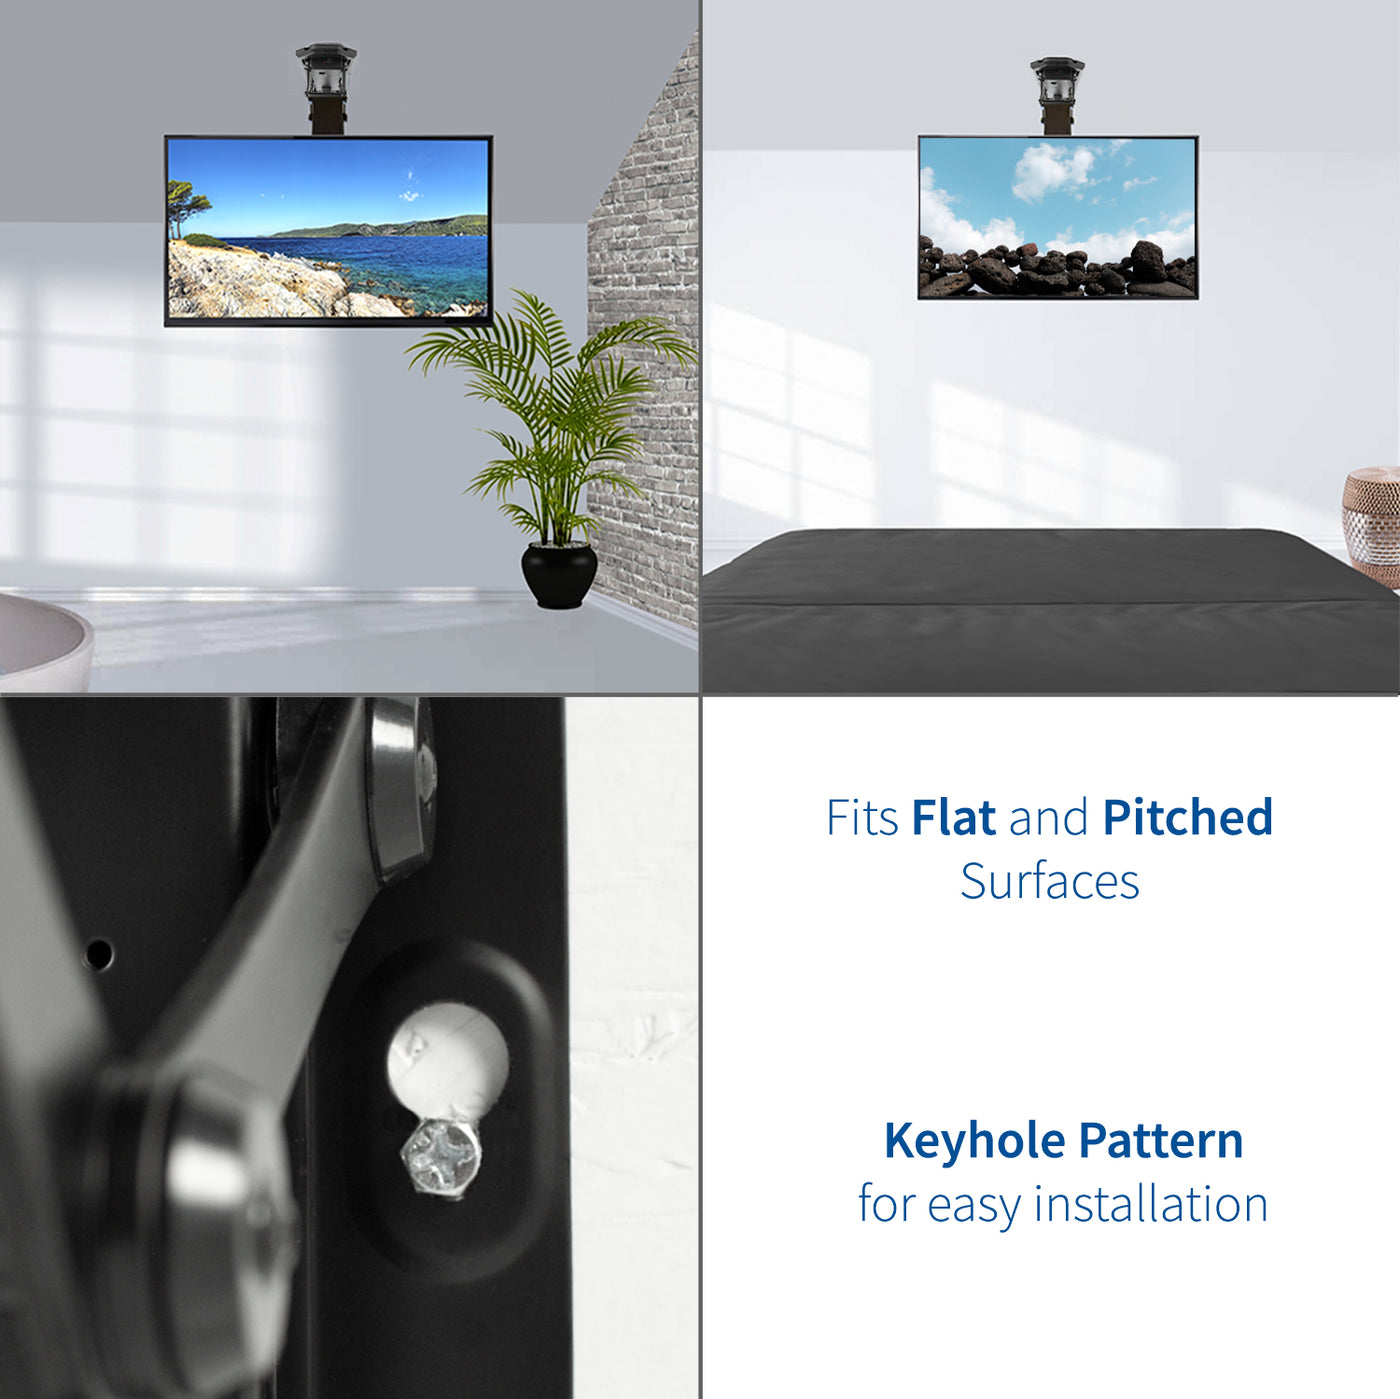 Universal mount fits flat and pitched ceilings and is easily installed with keyhole patterns.